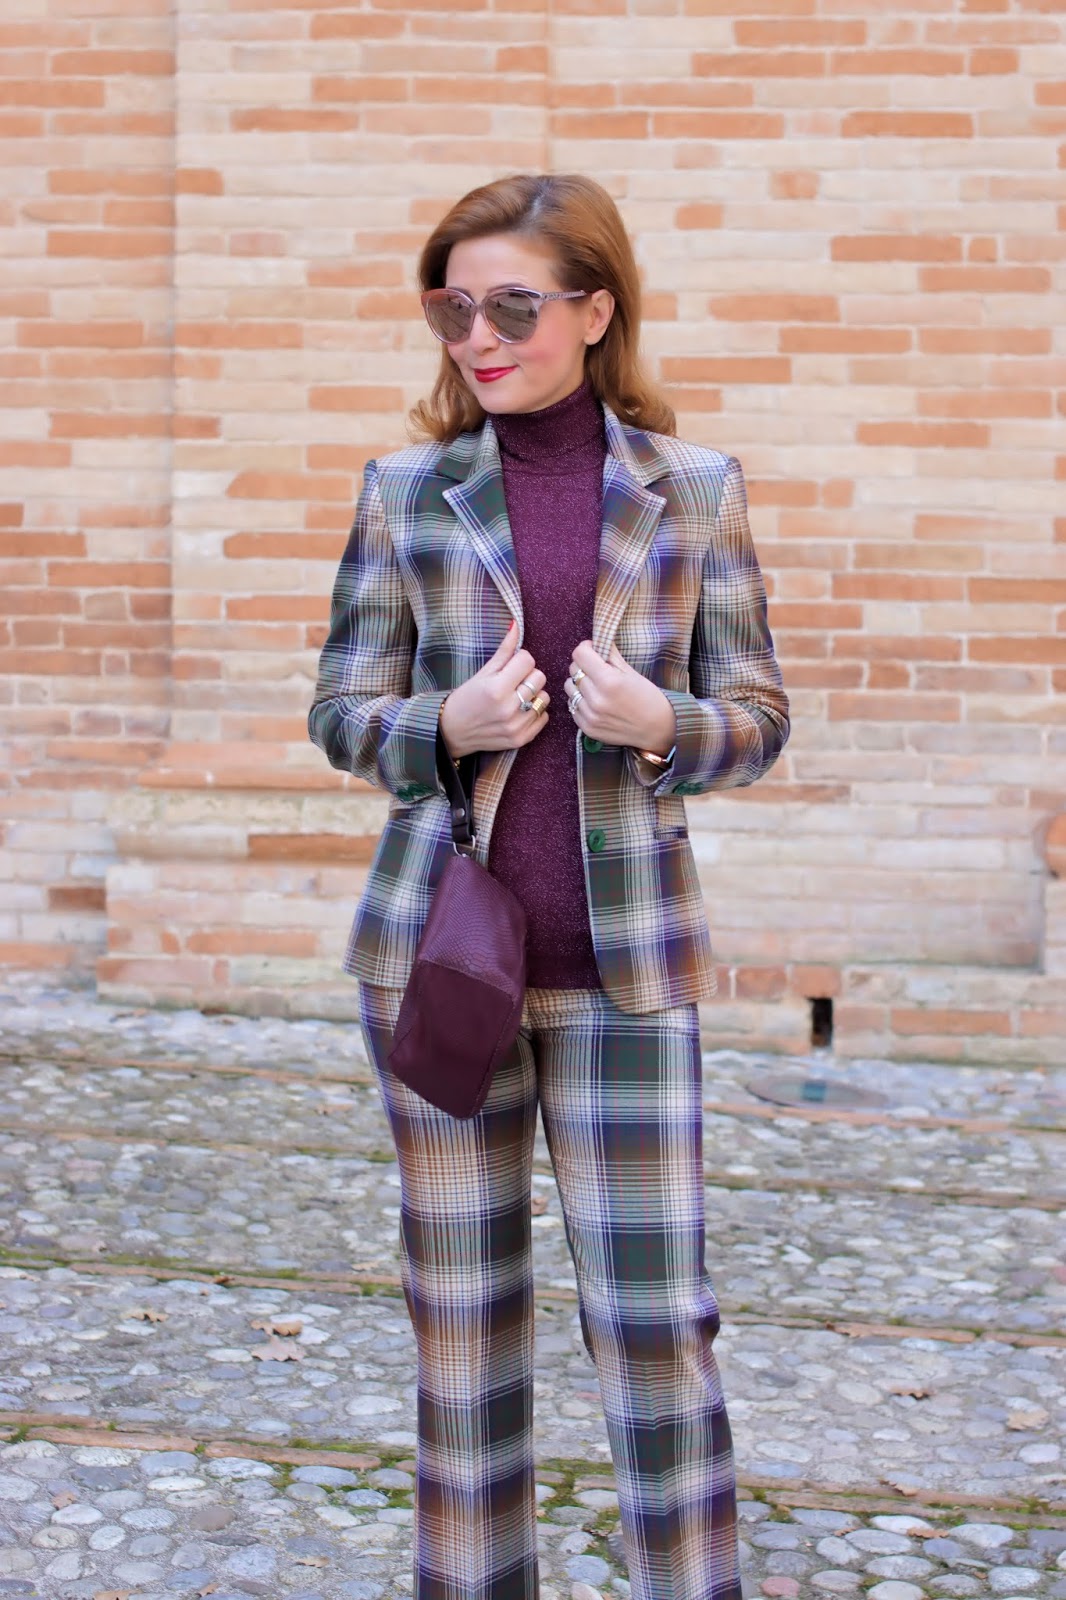 How to wear a plaid suit on Fashion and Cookies fashion blog, fashion blogger style